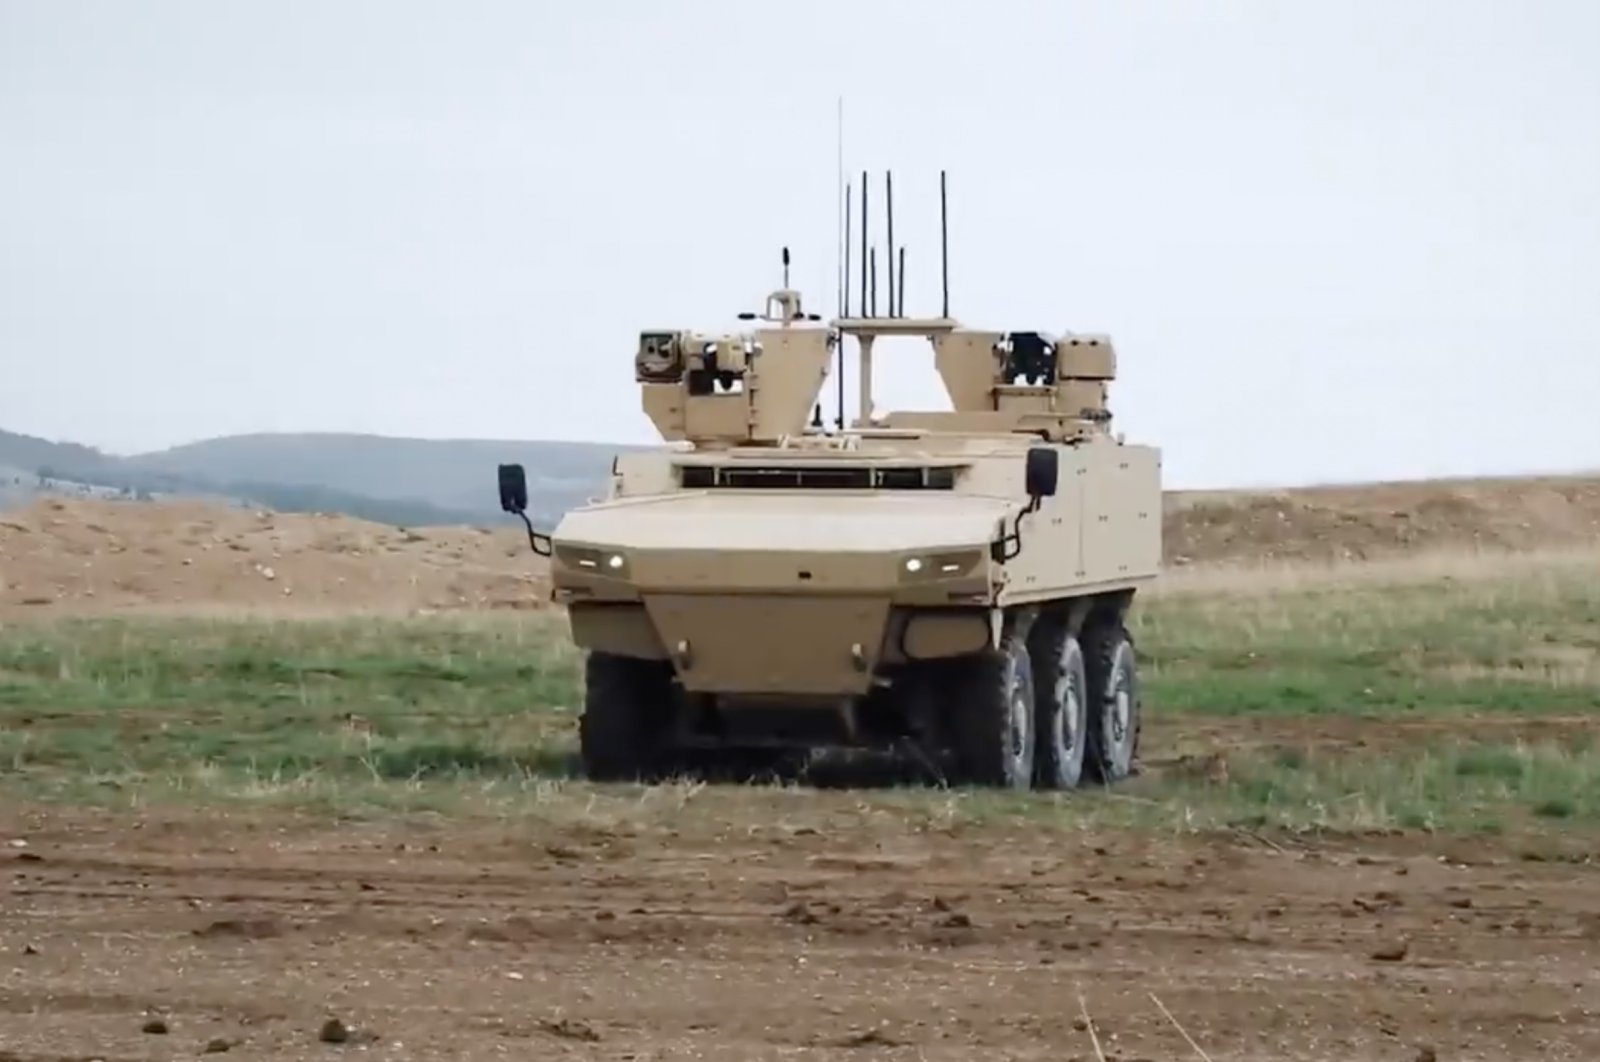 A screen grab from a video showing the PARS IV 6x6 from Turkish armored vehicle manufacturer FNSS.

